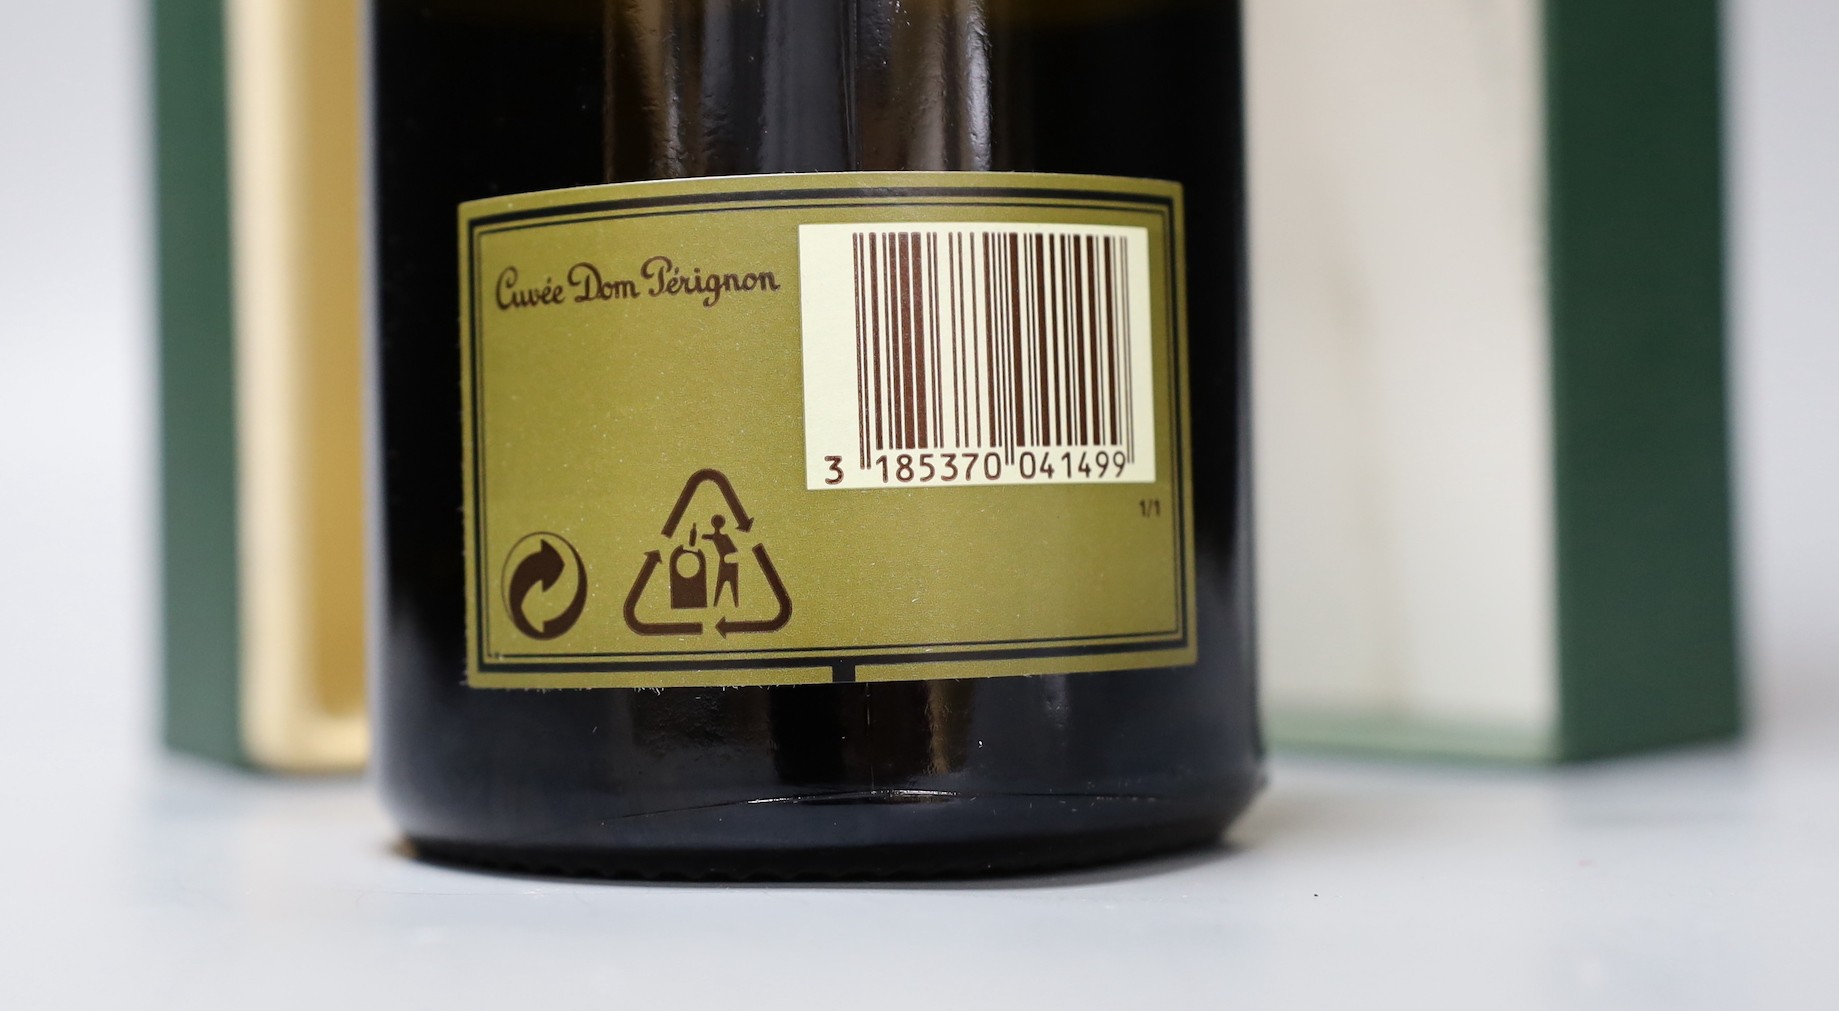 A cased bottle of 1985 Dom Perignon (sealed)